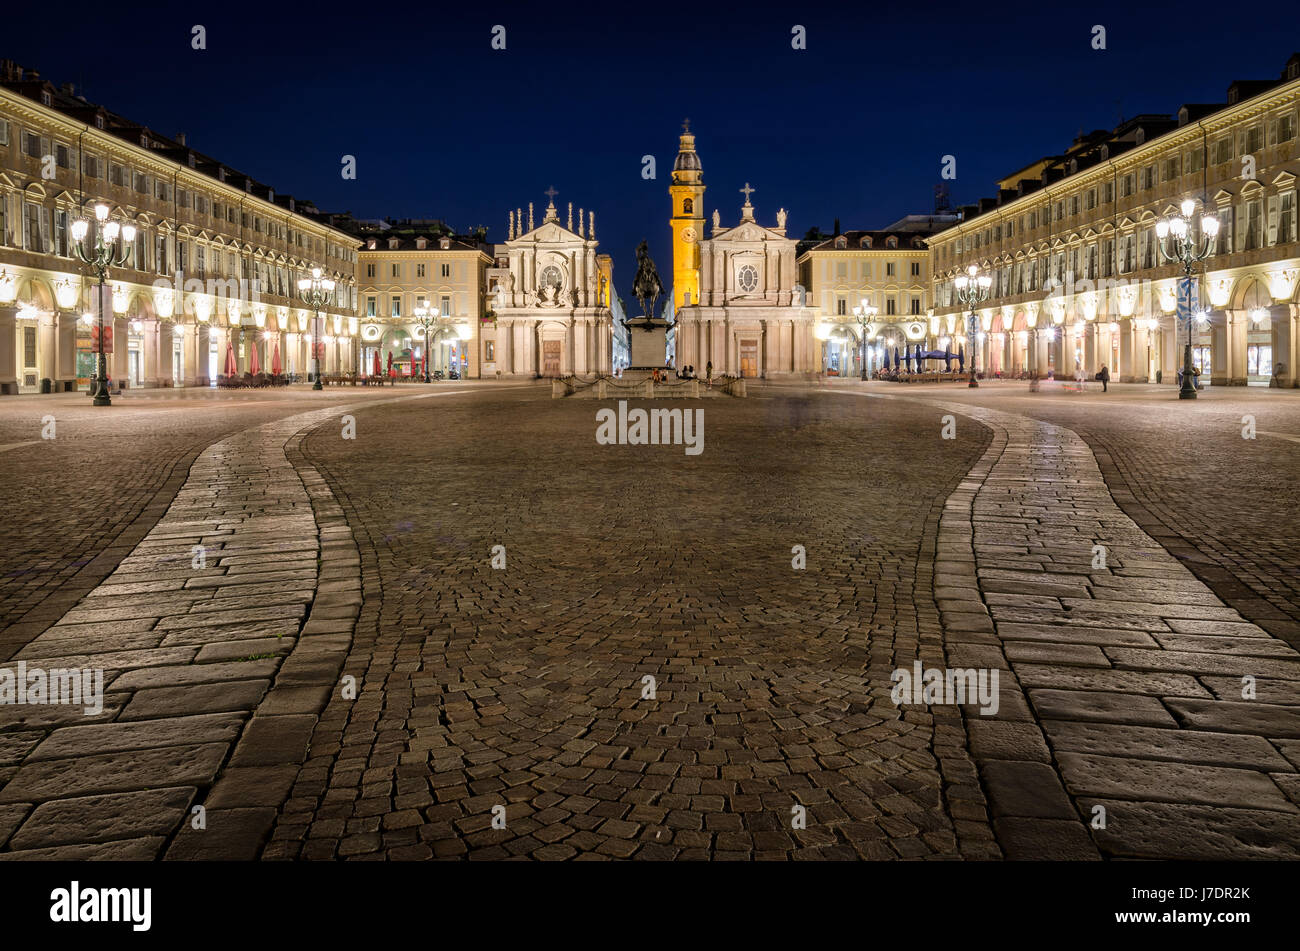 Torino Piazza San Carlo with its elegant buildings at night Stock Photo